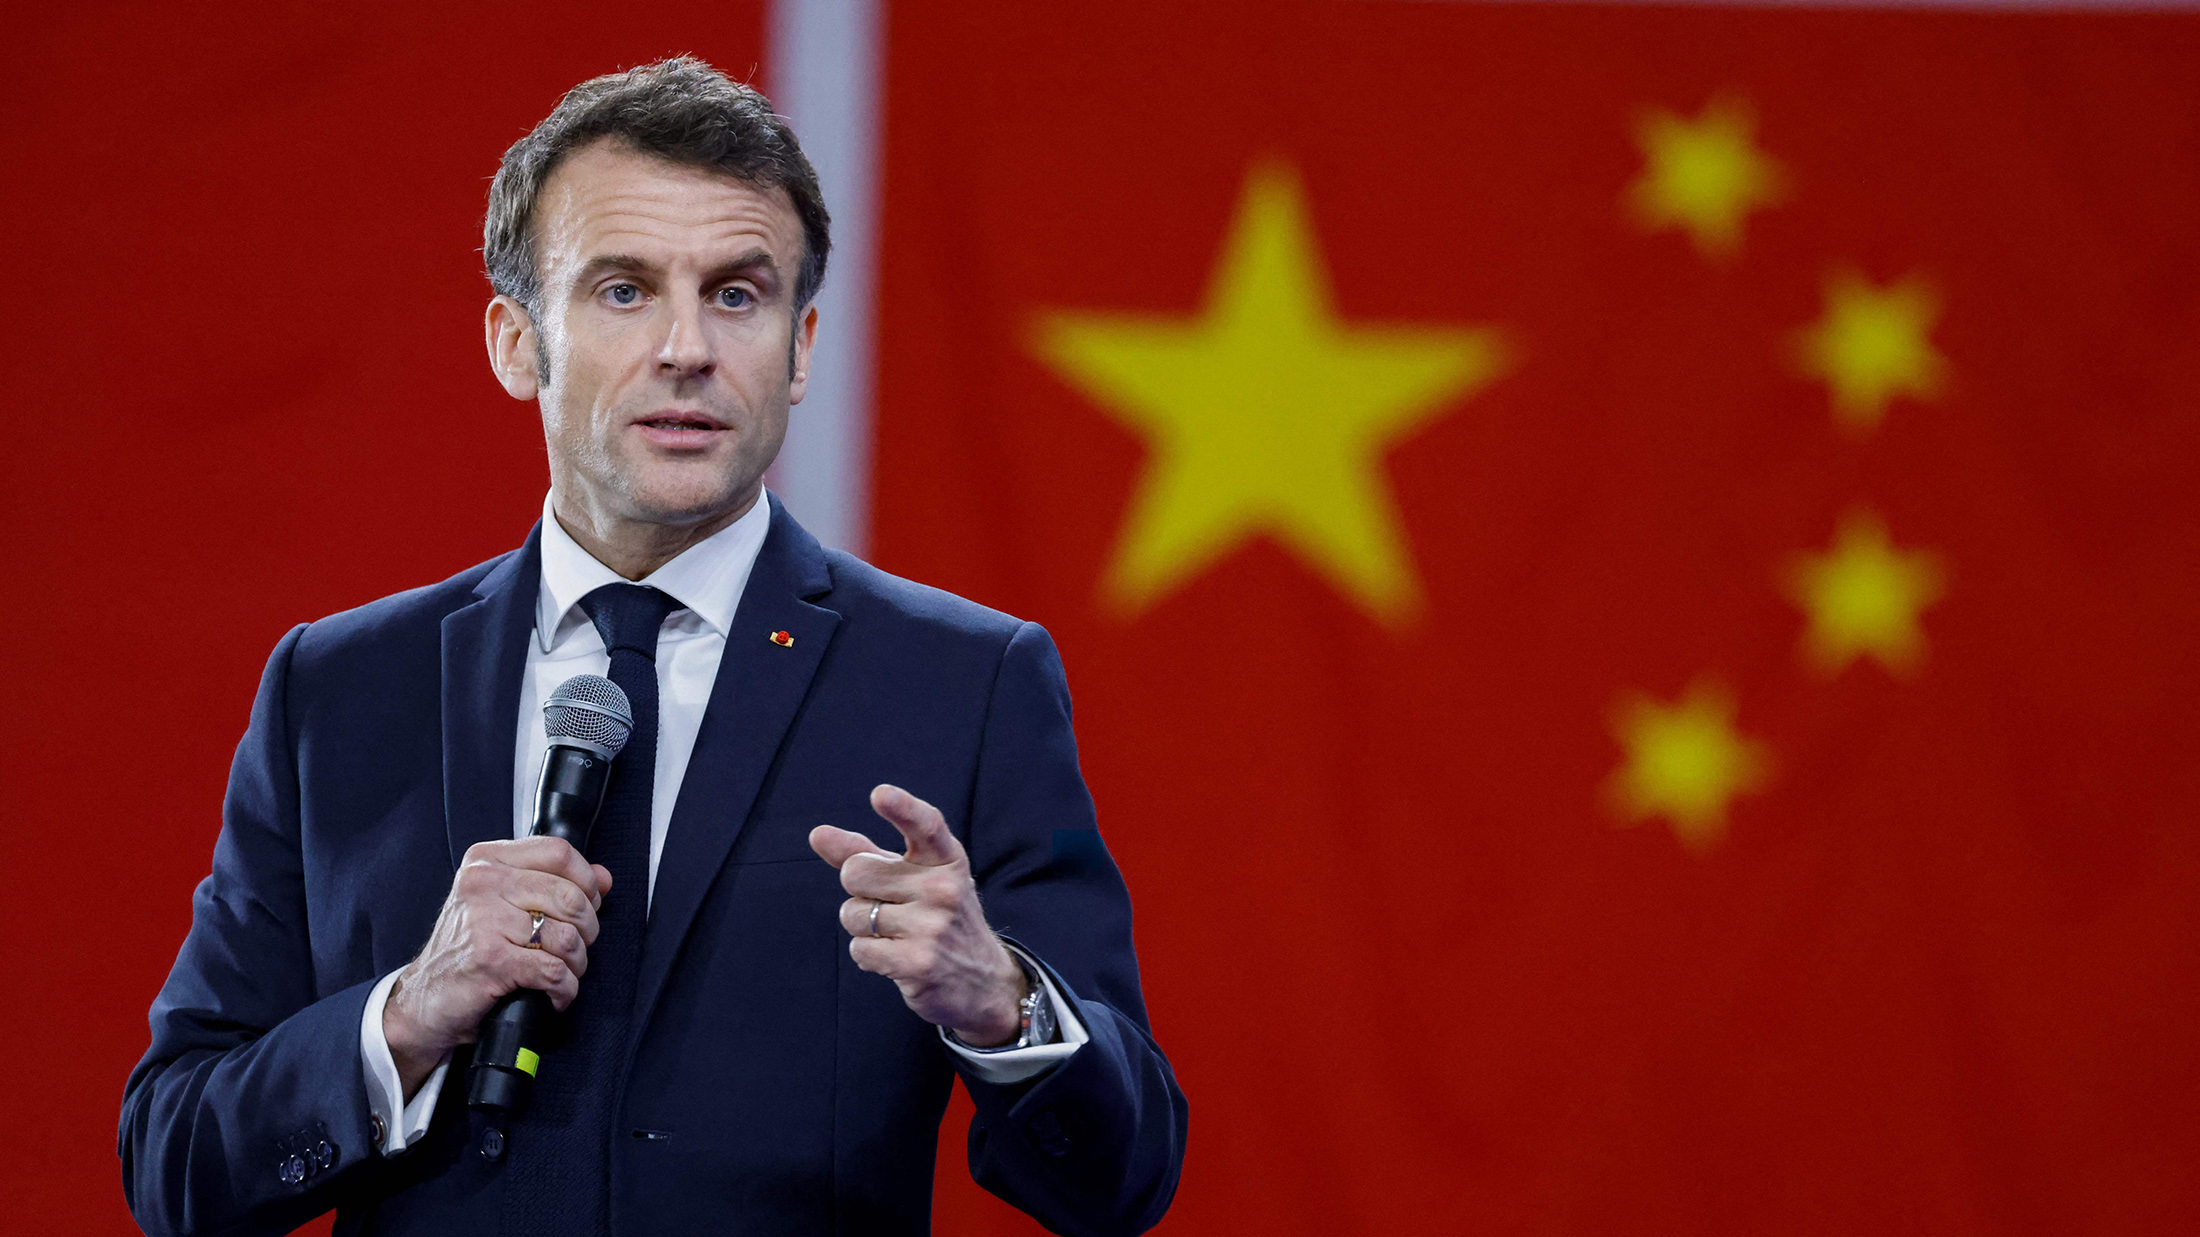 French President Macron Seeks to Defend Stance on China After